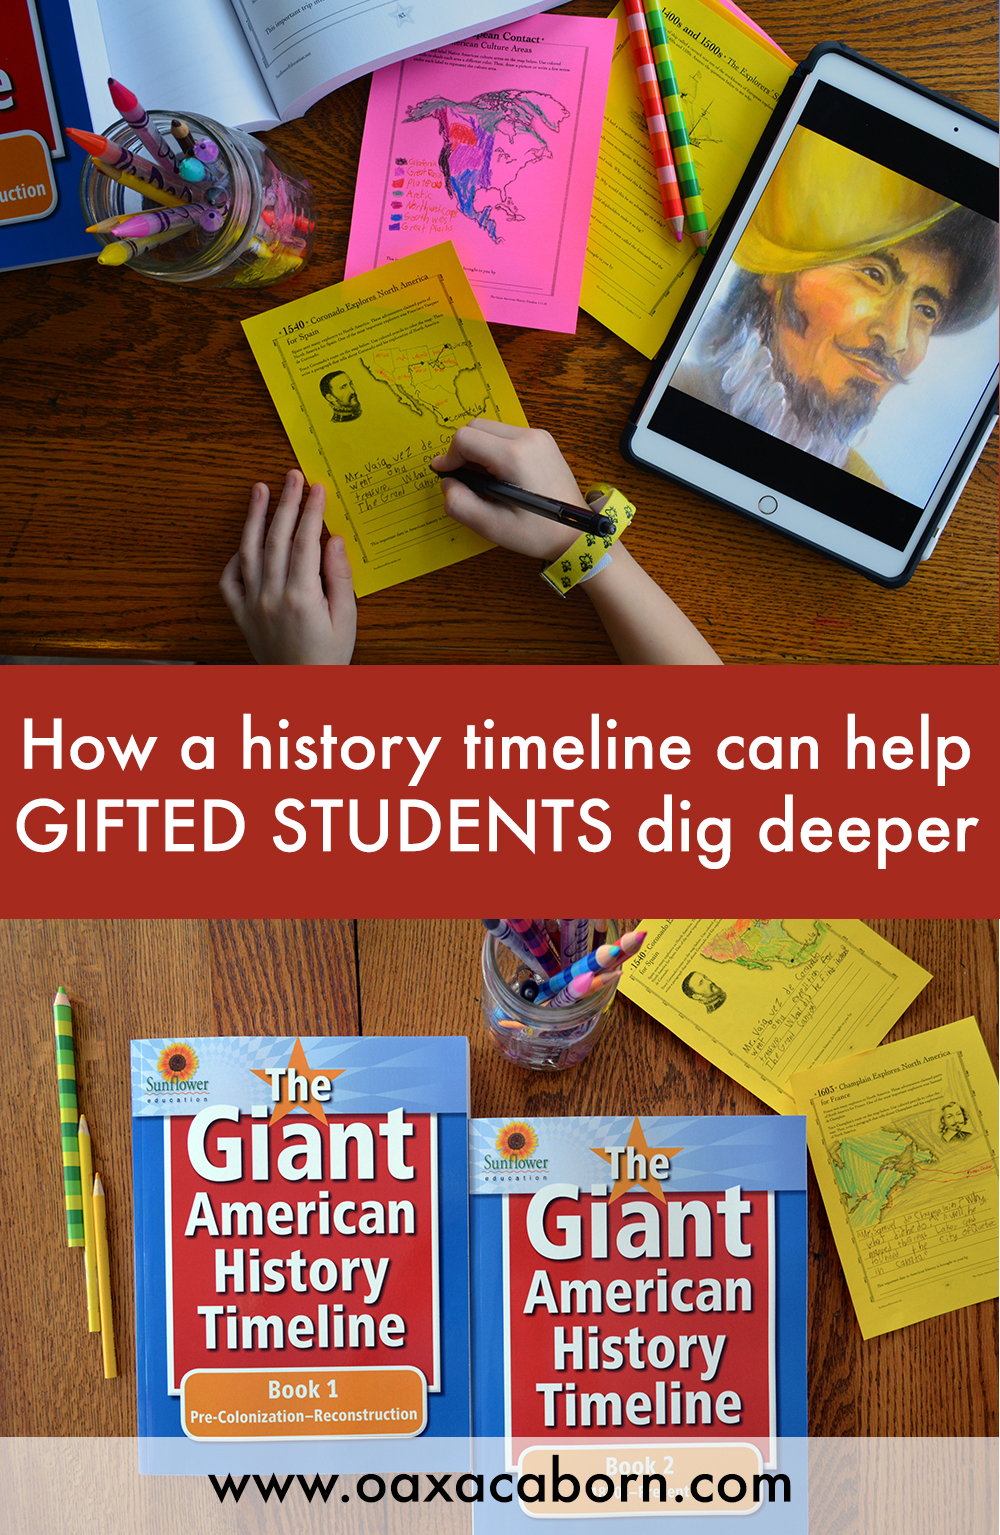 How a history timeline can help gifted students dig deeper